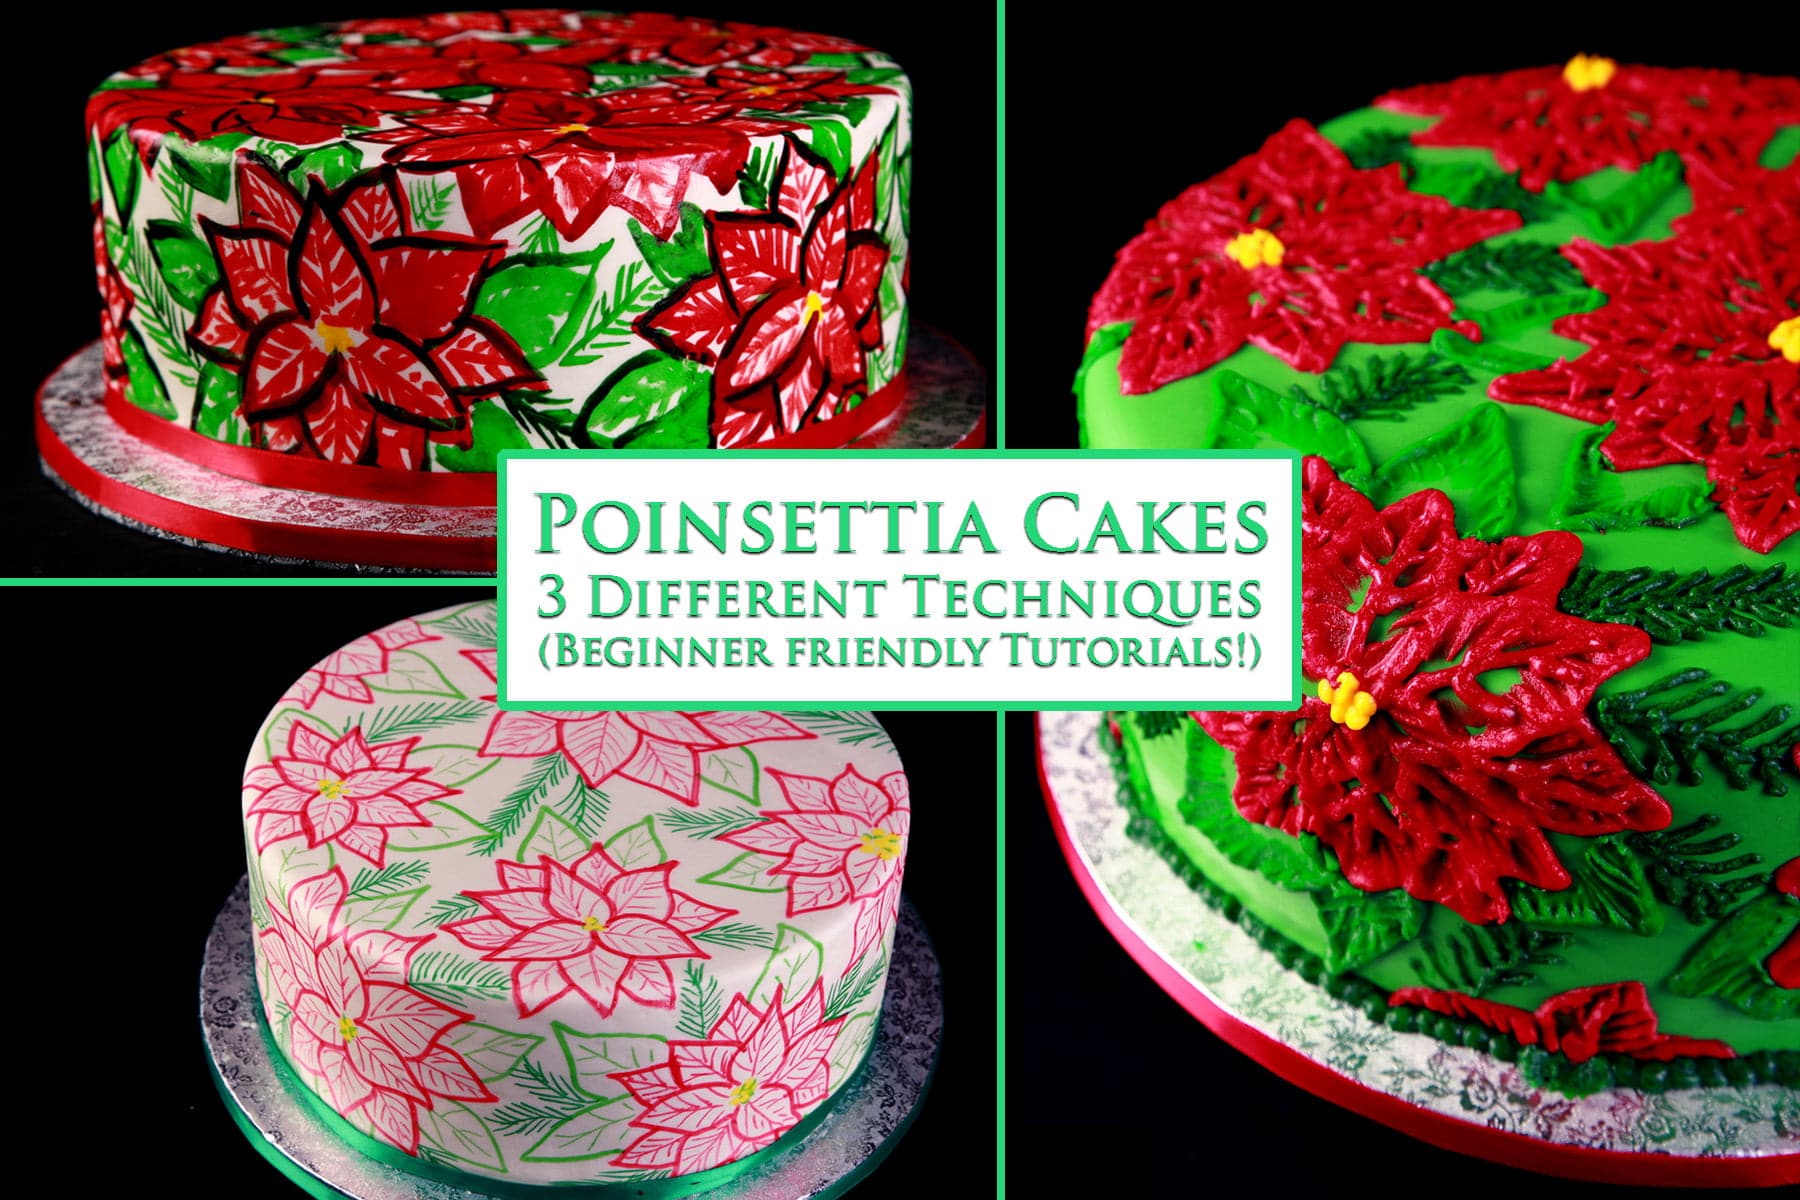 3 different round cakes covered with a poinsettia design.